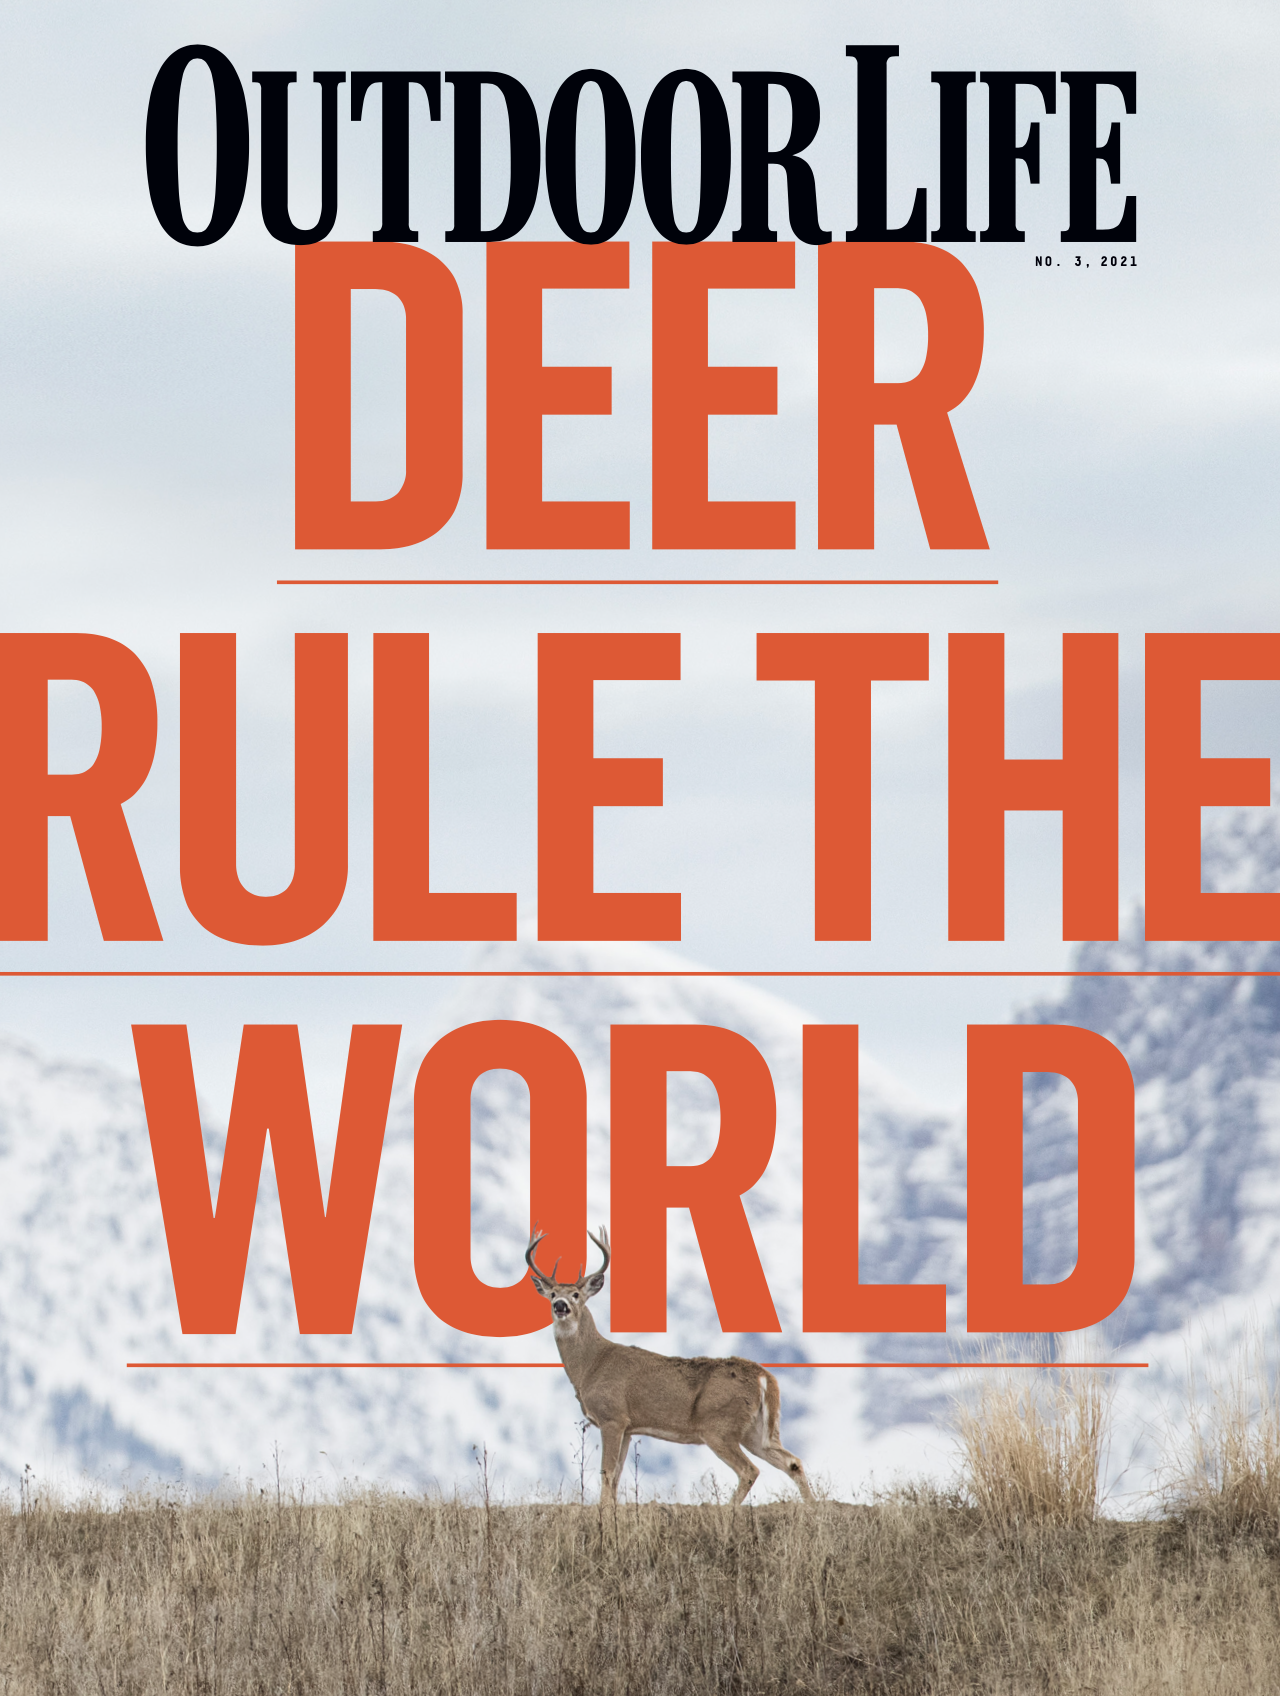 The 2021 no. 3 issue of Outdoor Life magazine: Deer Rule the World.